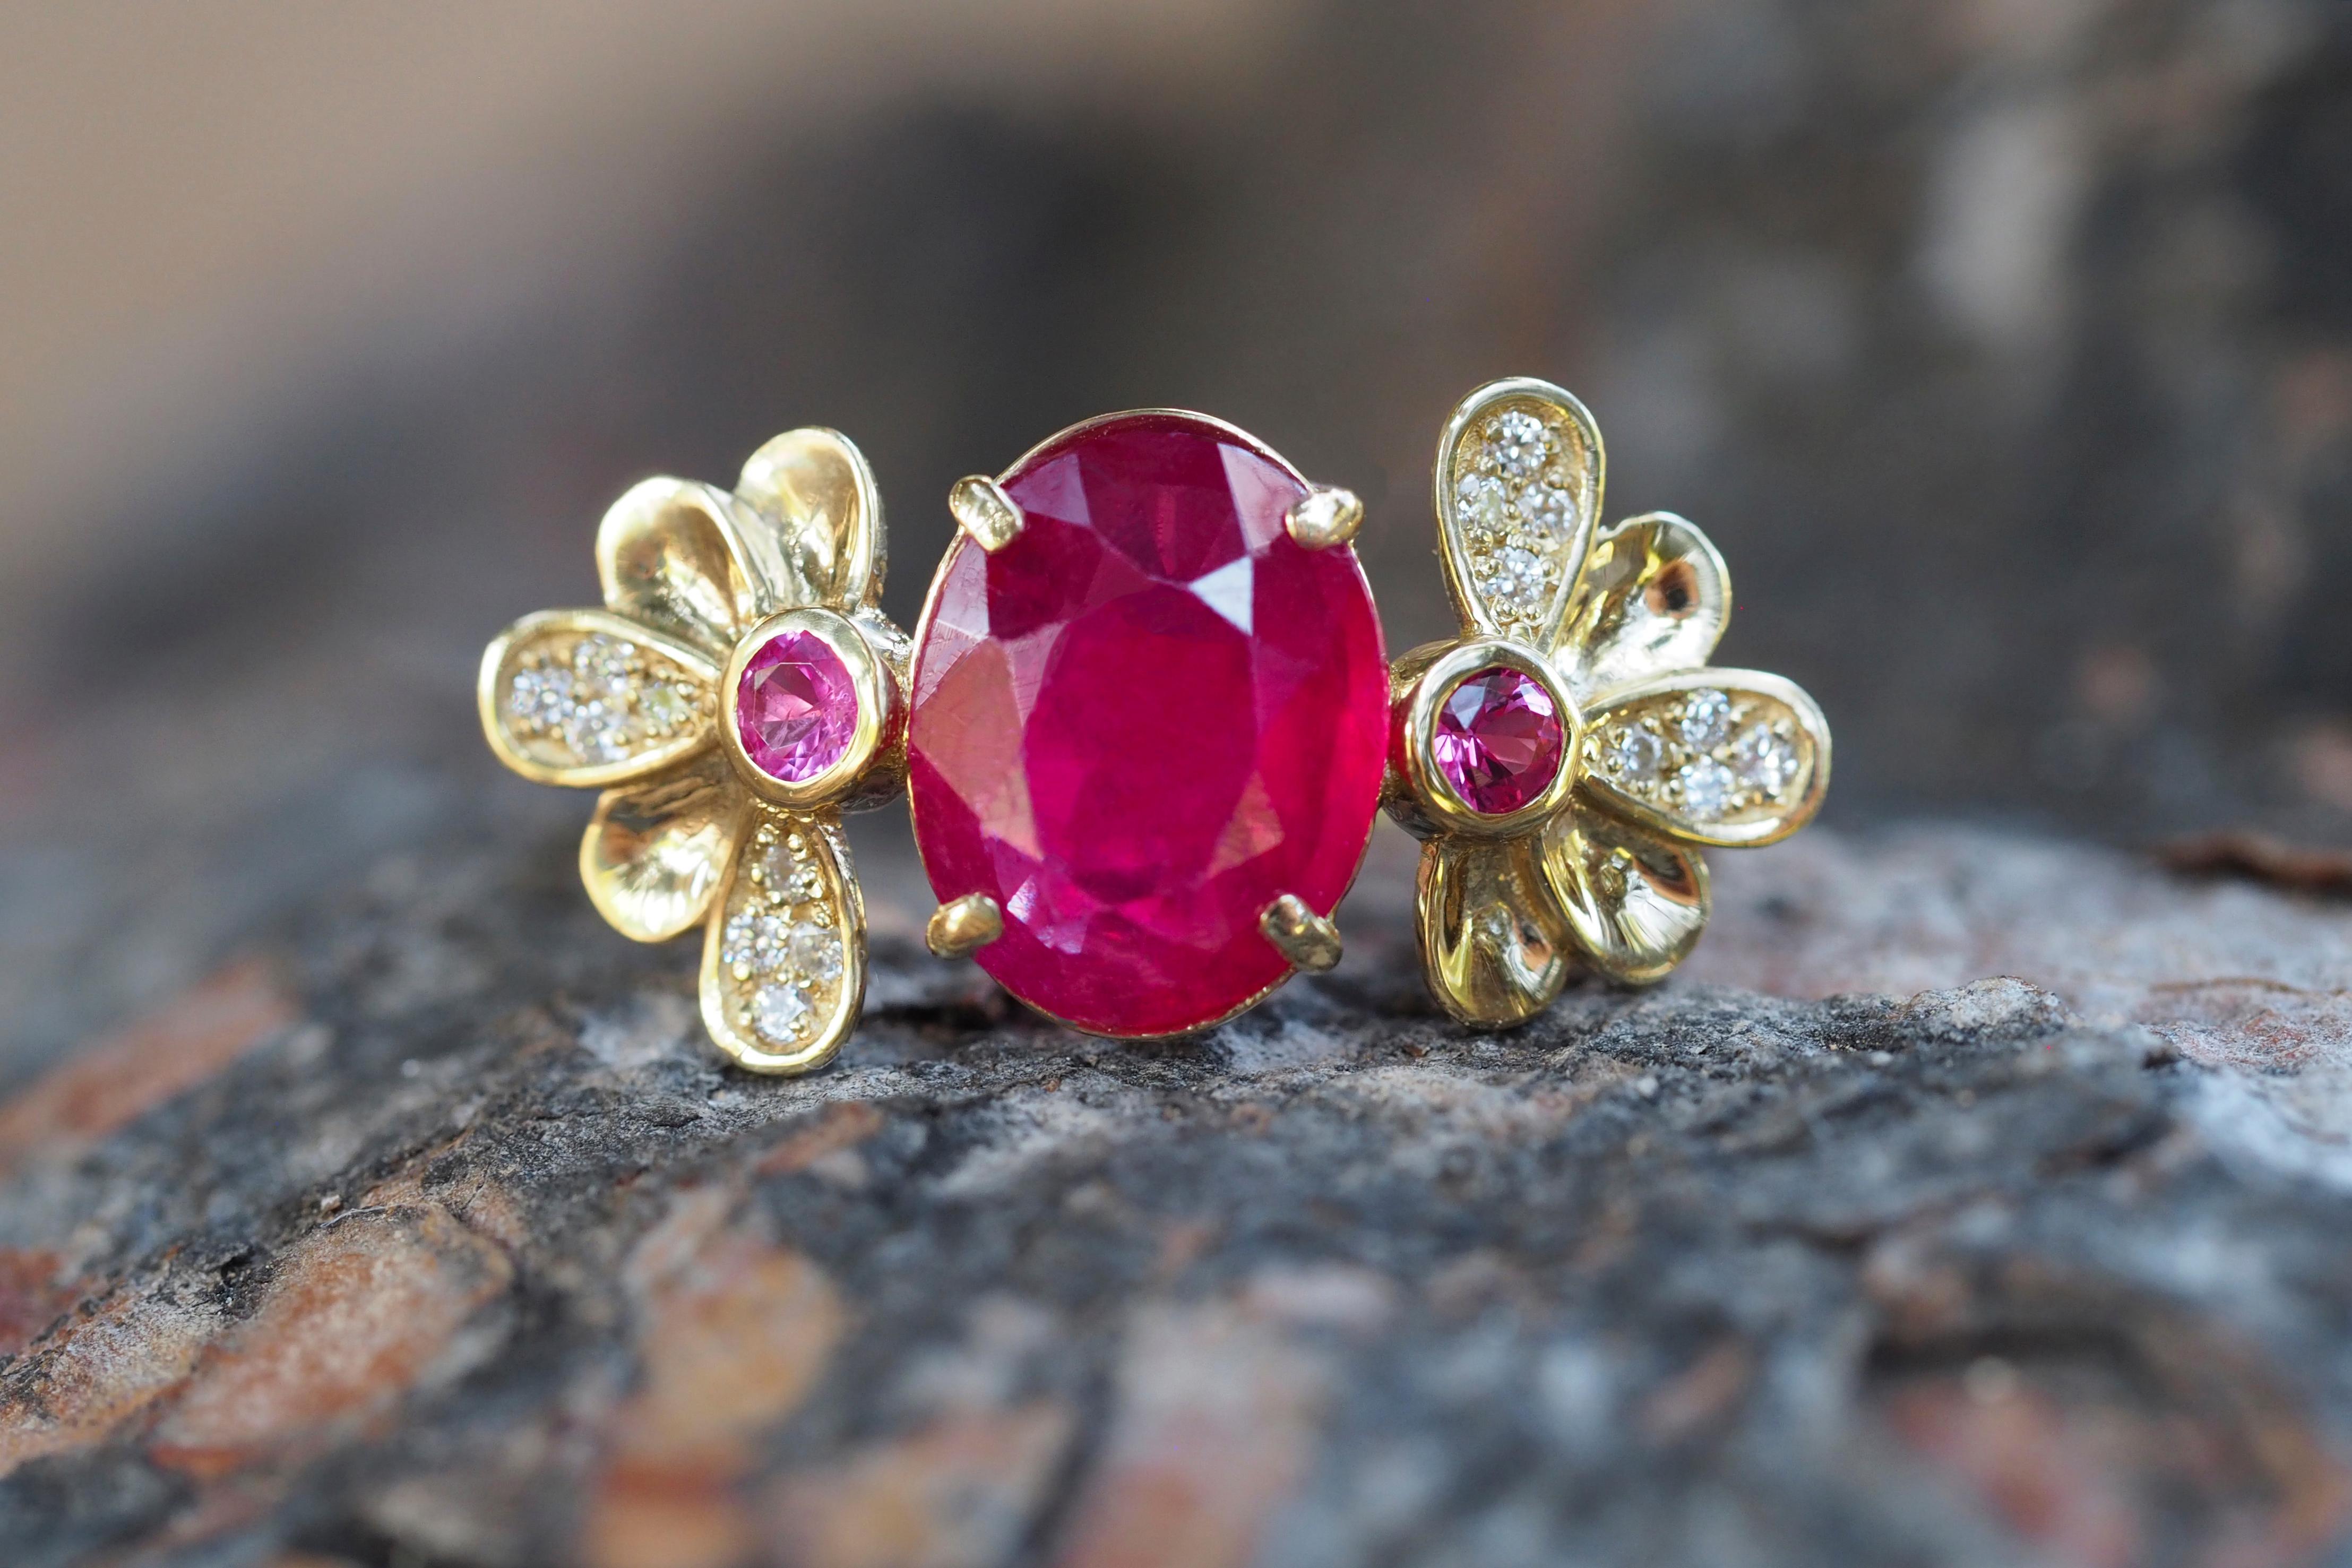 For Sale:  14 Karat Gold Ring with Ruby and Diamonds. Flower design ruby ring 3